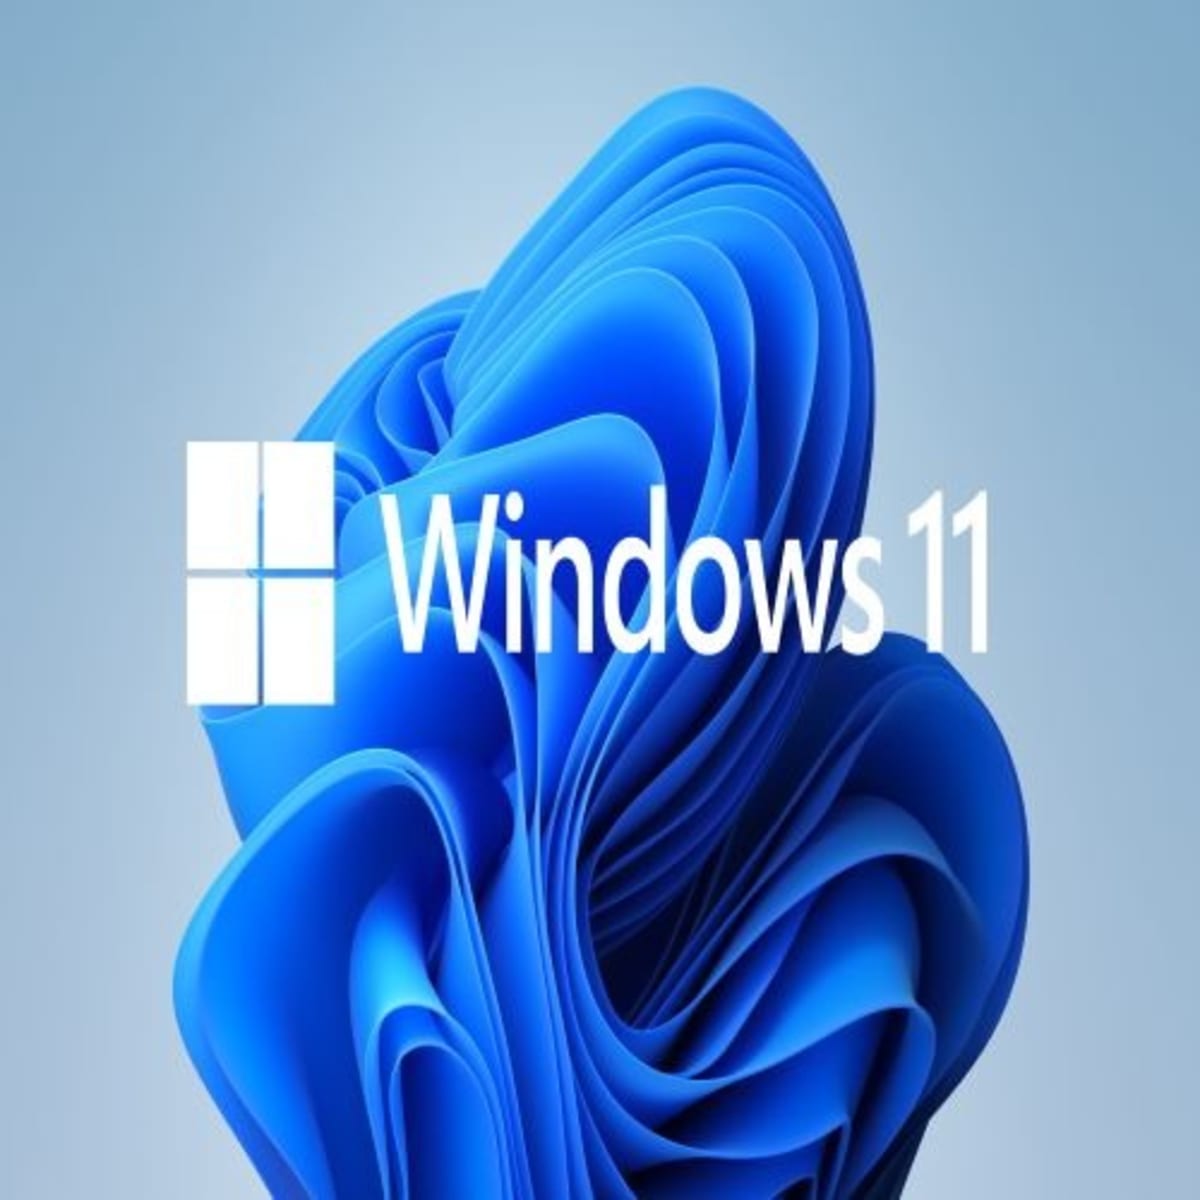 Windows 11 Home Vs Pro Which One Should You Upgrade To 42 Off 8347